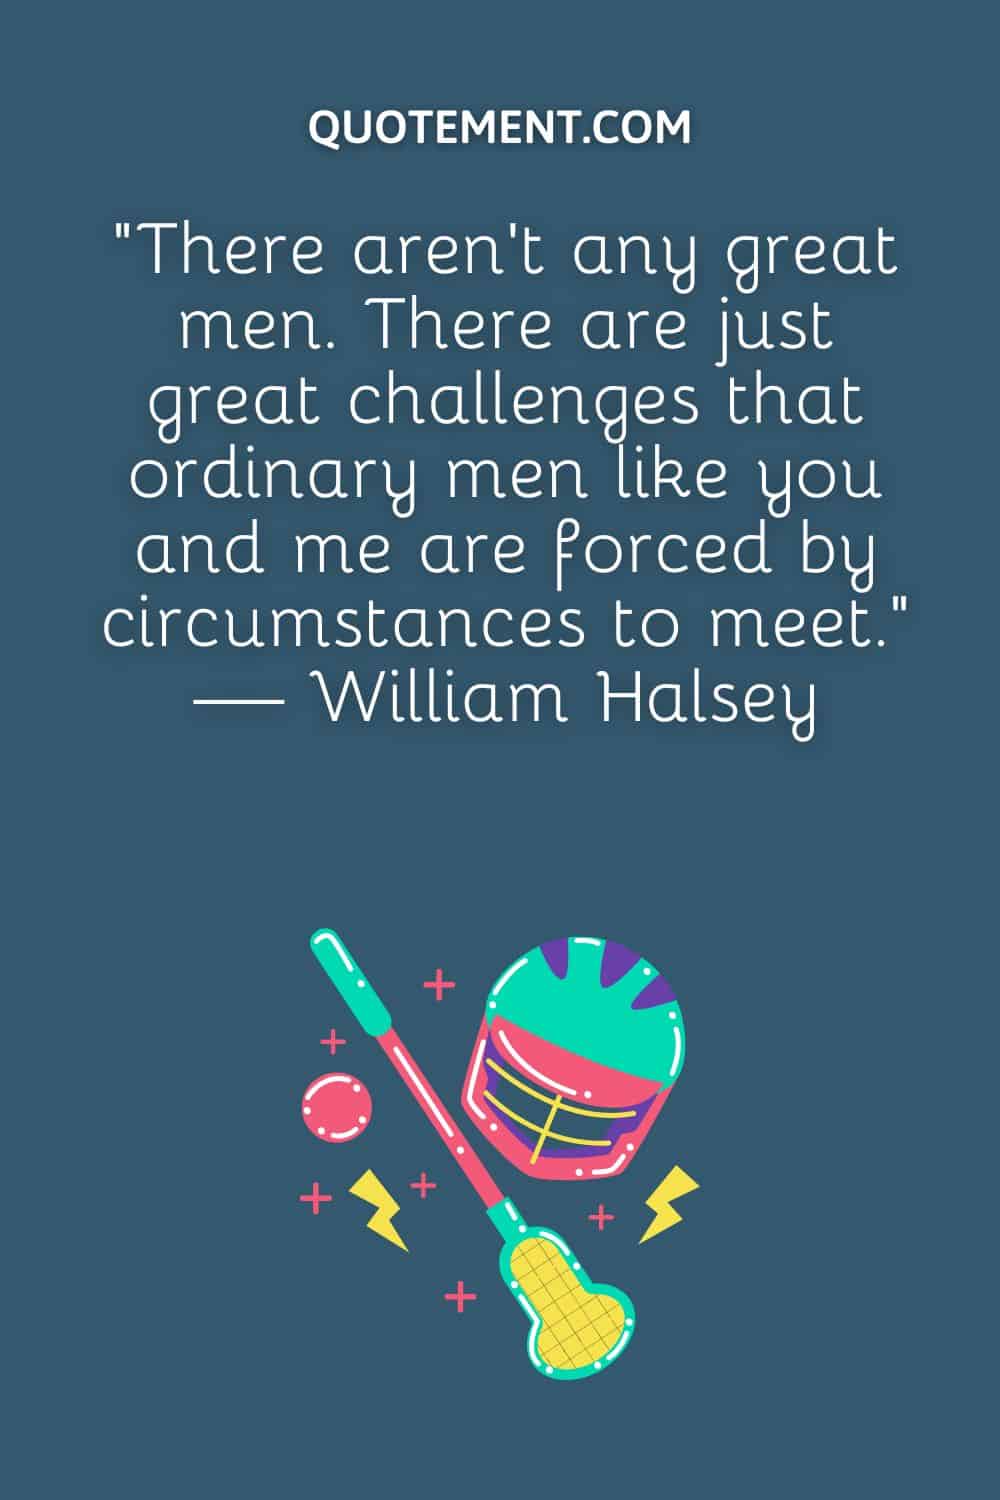 “There aren't any great men. There are just great challenges that ordinary men like you and me are forced by circumstances to meet.” — William Halsey